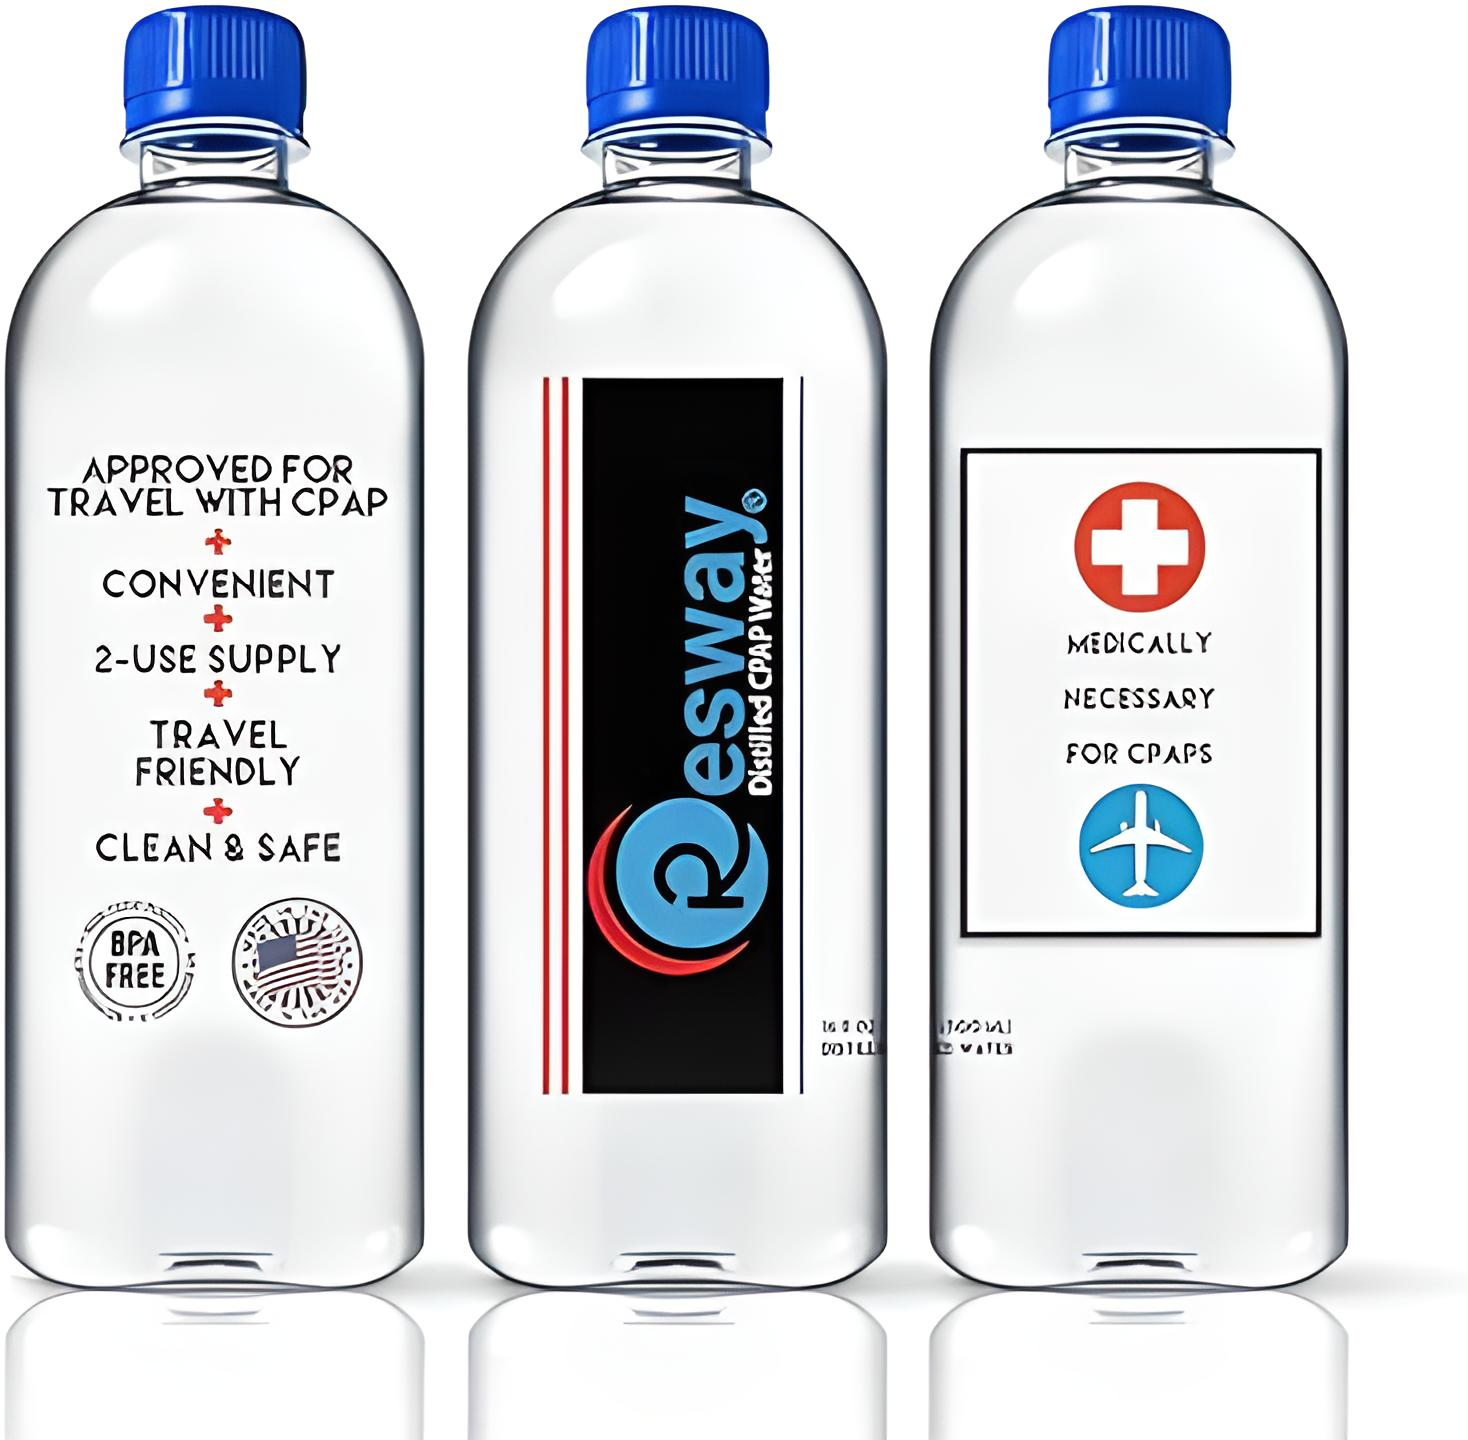 Resway distilled water bottles for CPAP machines.